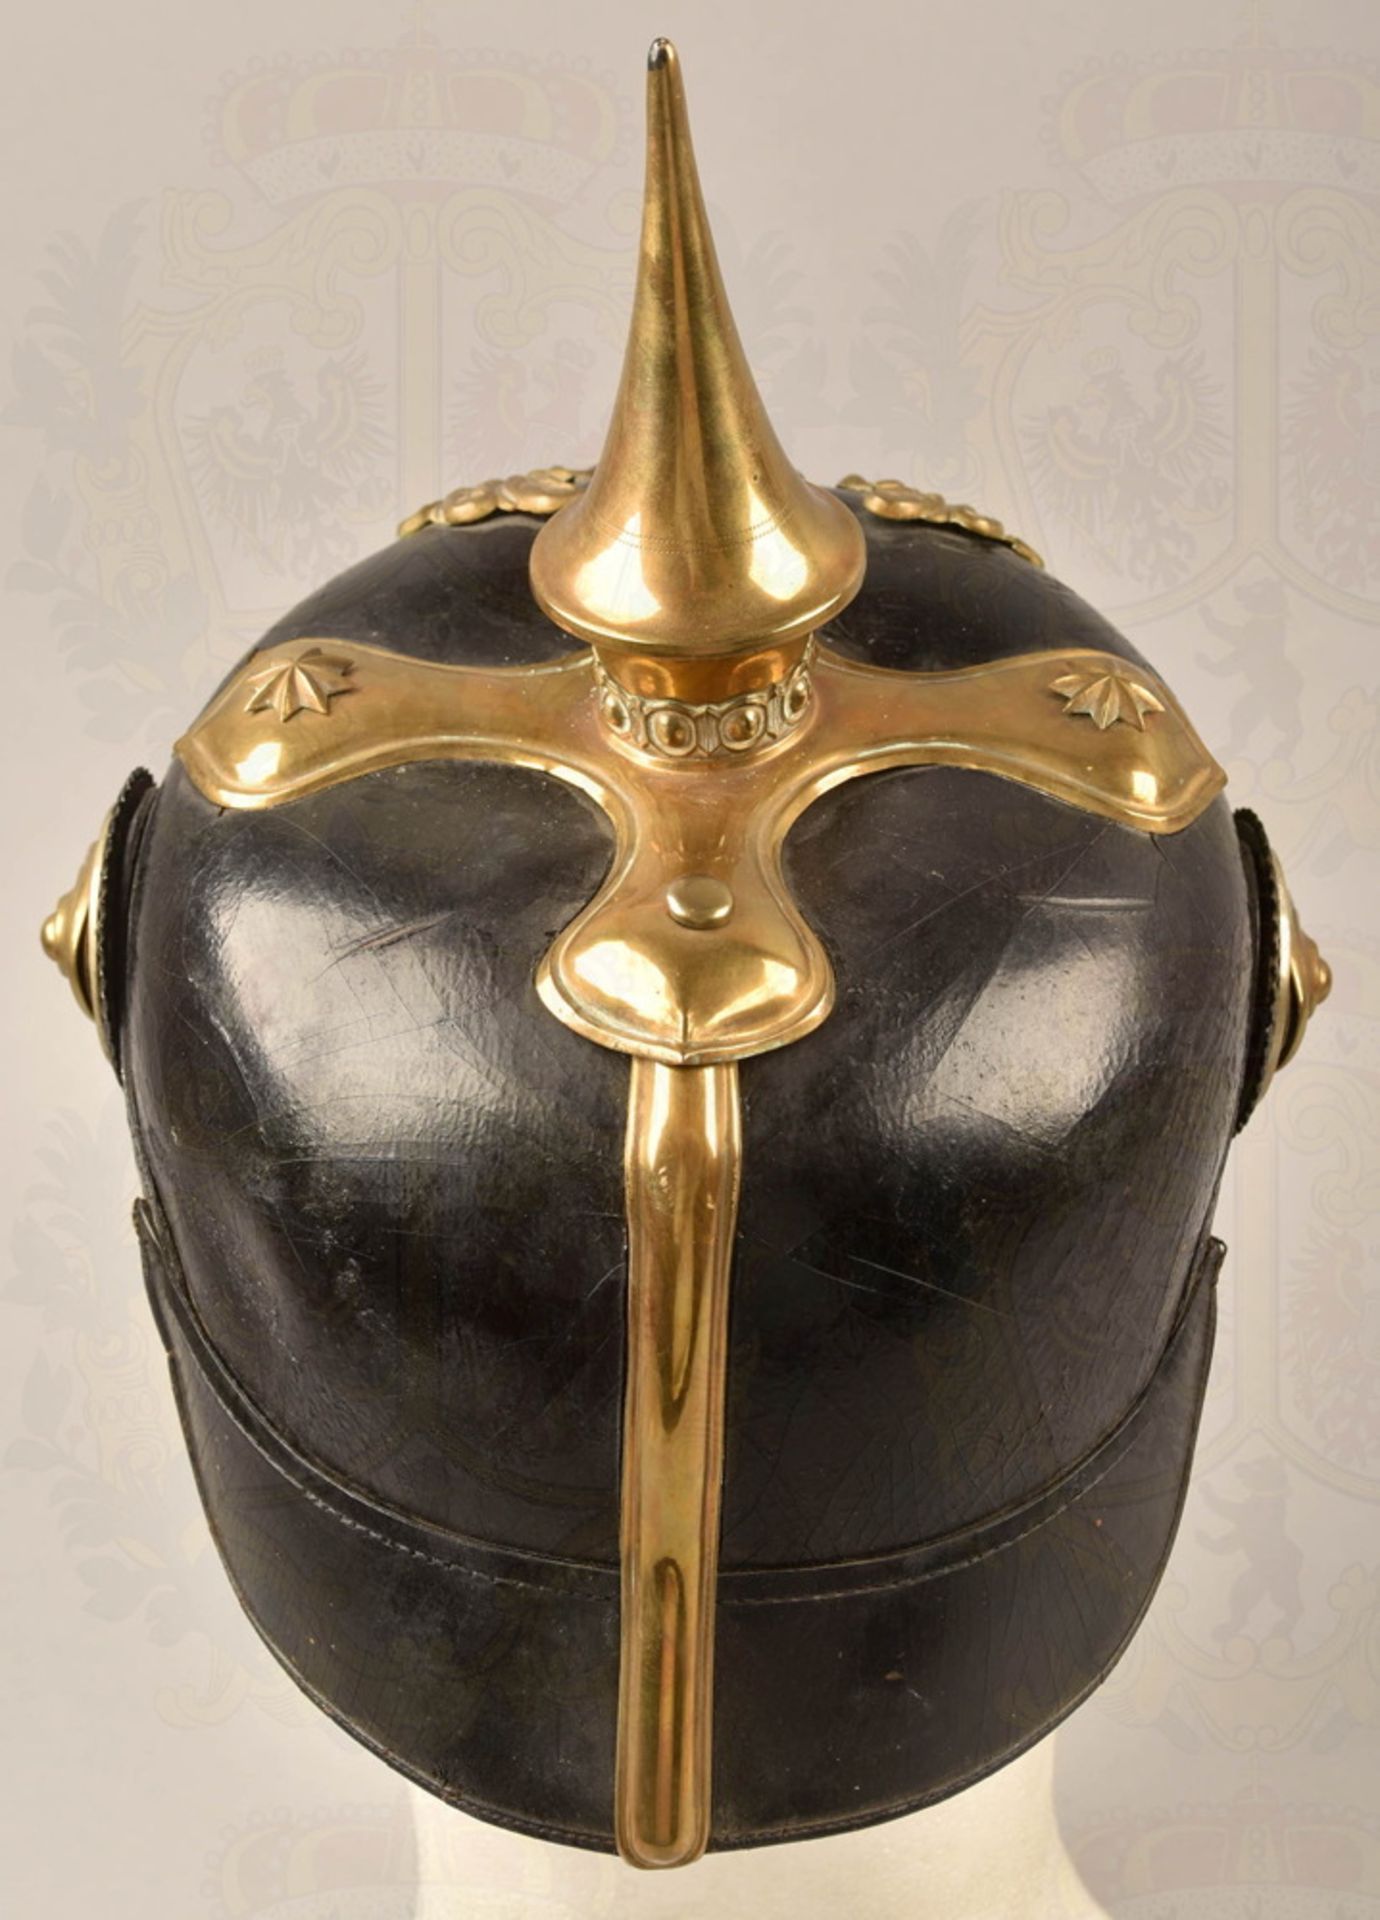 Helmet for military officials/officer rank - Image 4 of 7